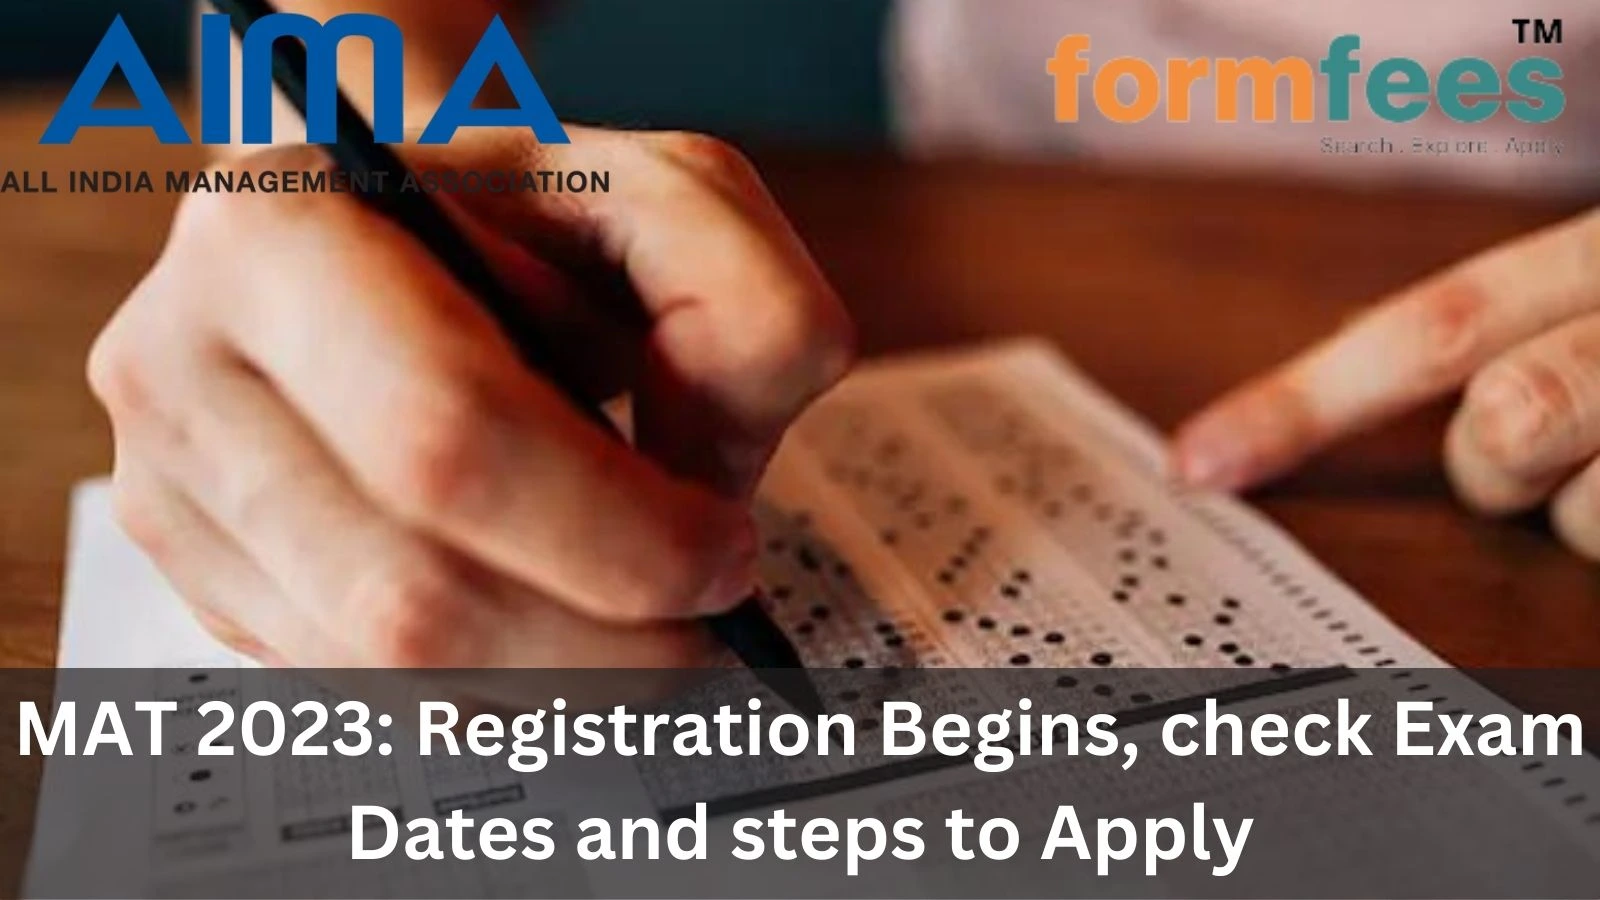 MAT 2023: Registration Begins, check Exam Dates and steps to Apply